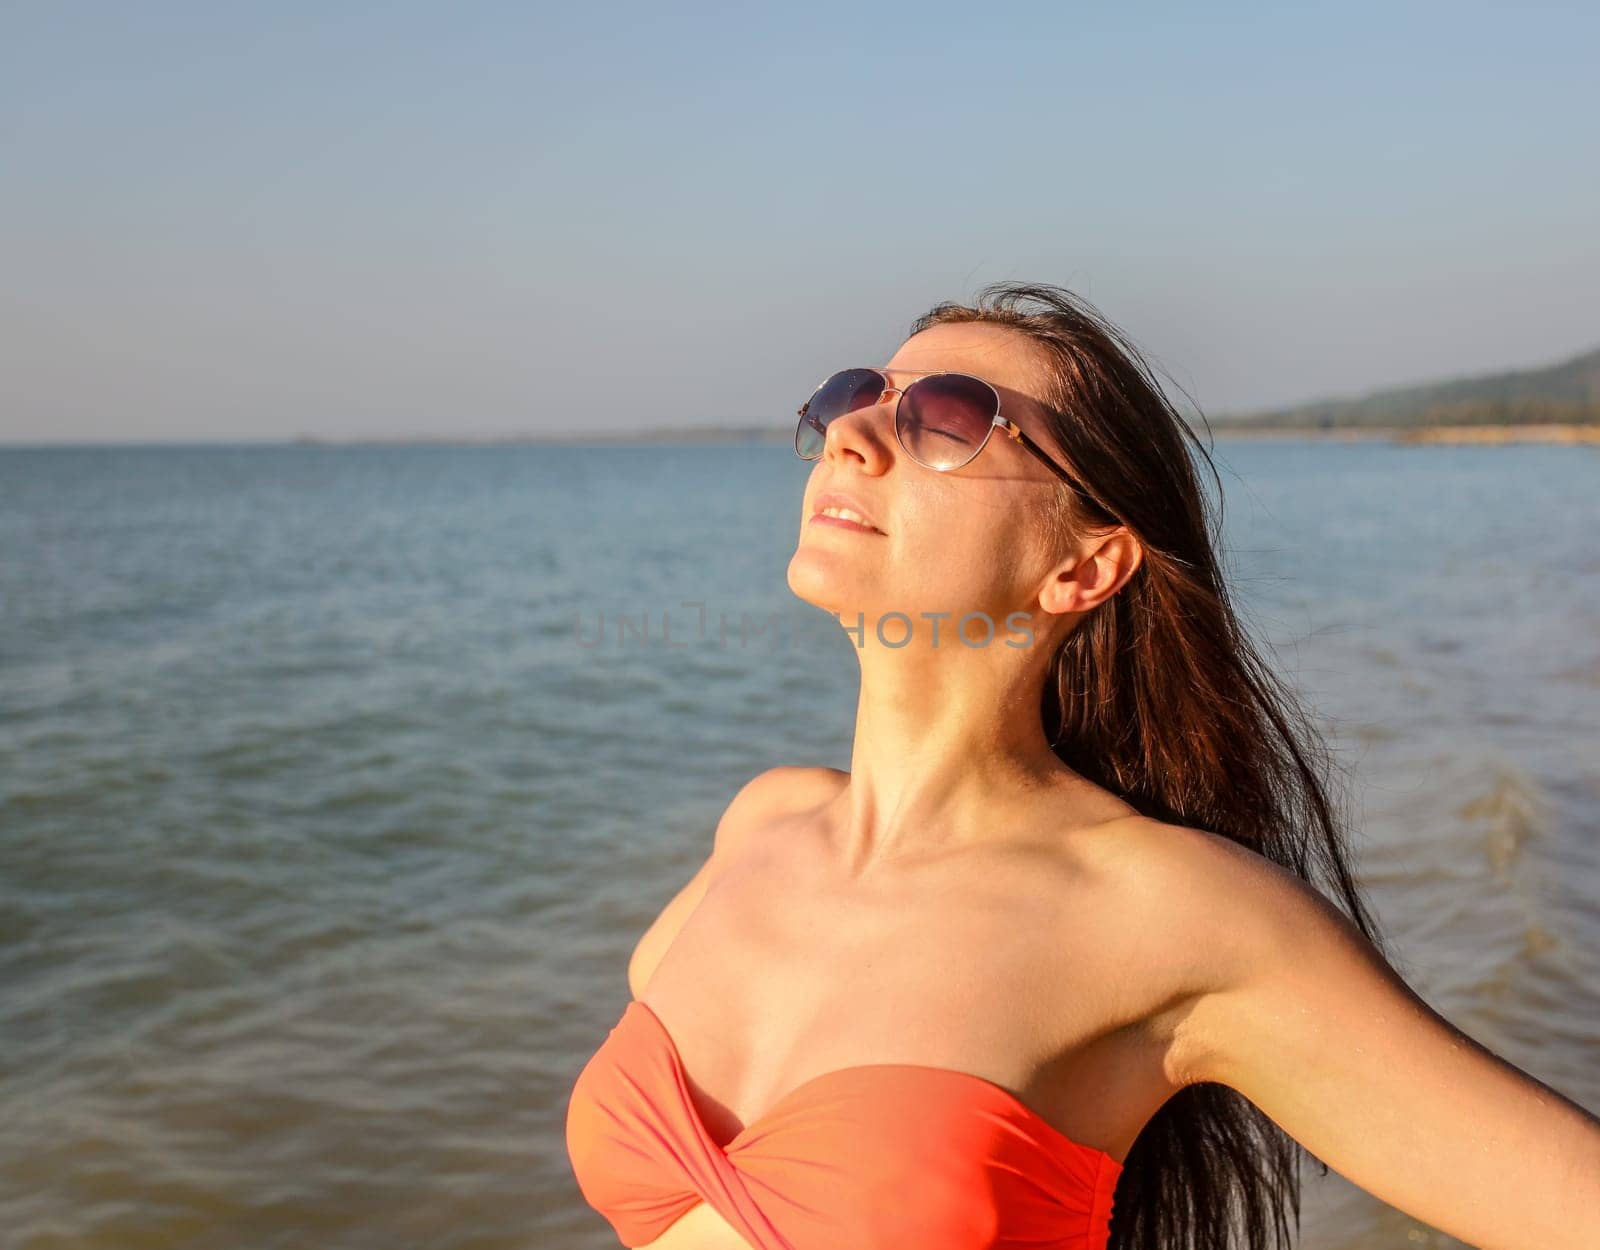 Young woman in red bikini and sunglasses, arms spread, looking into and enjoying afternoon sun, sea behind. Detail on head and top of her body. by Ivanko